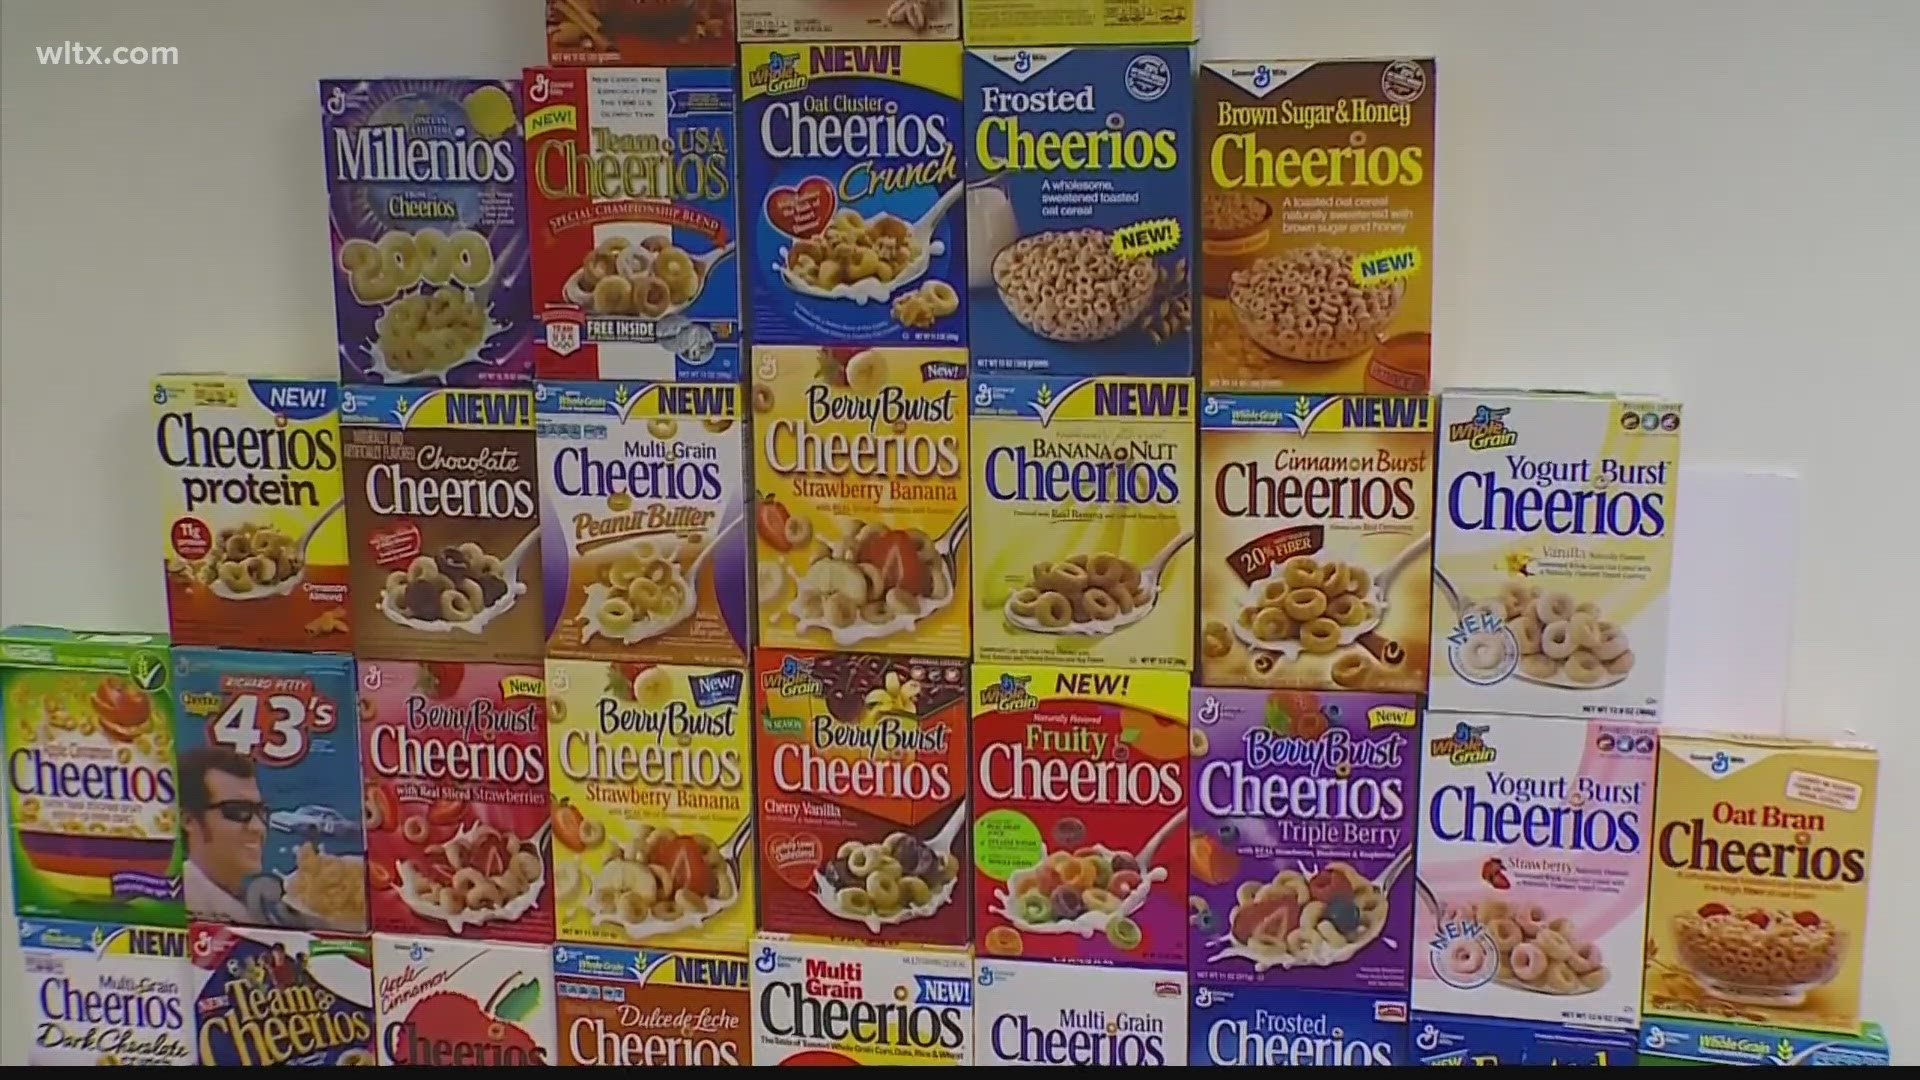 Why are food activists targeting Honey Nut Cheerios?